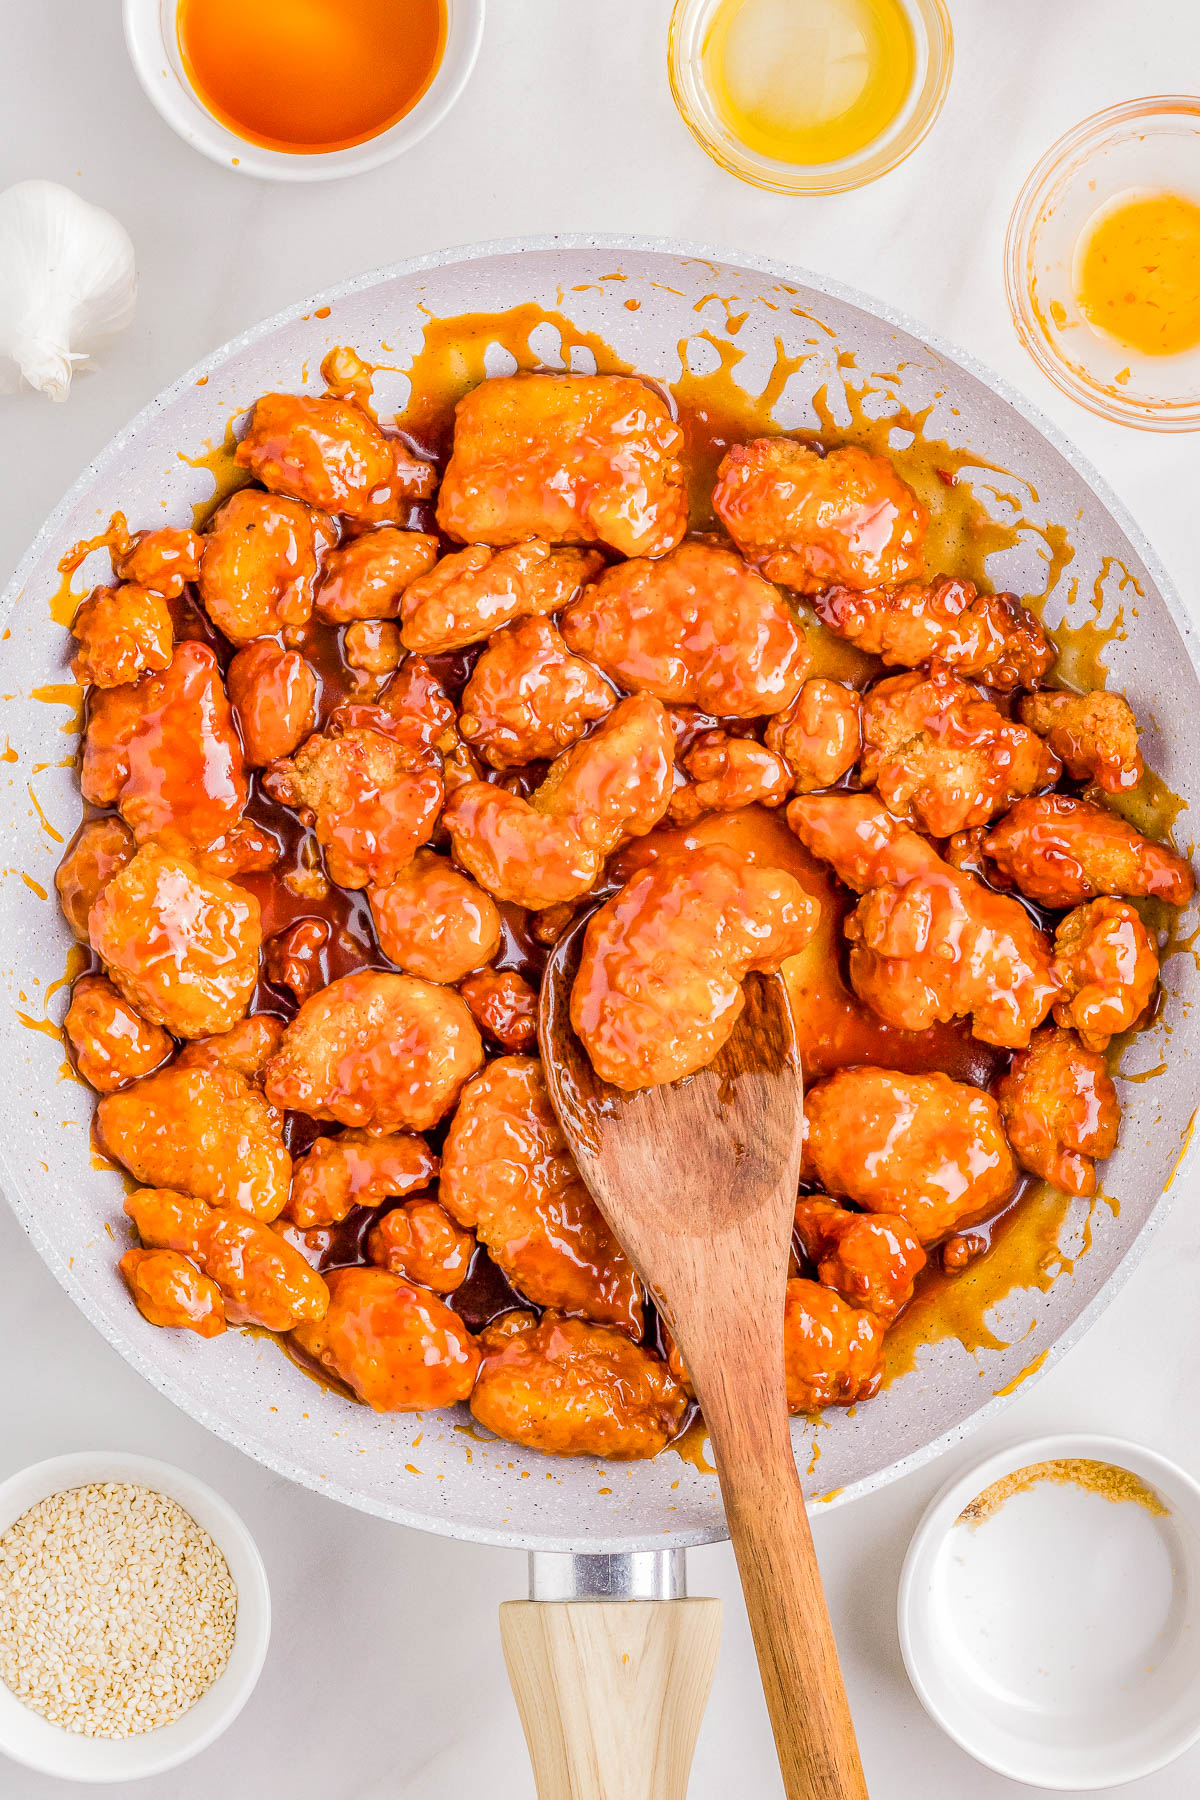 Sautéed sesame chicken in a pan, coated in sticky orange sauce, with a wooden spoon, surrounded by small bowls of ingredients and sesame seeds.